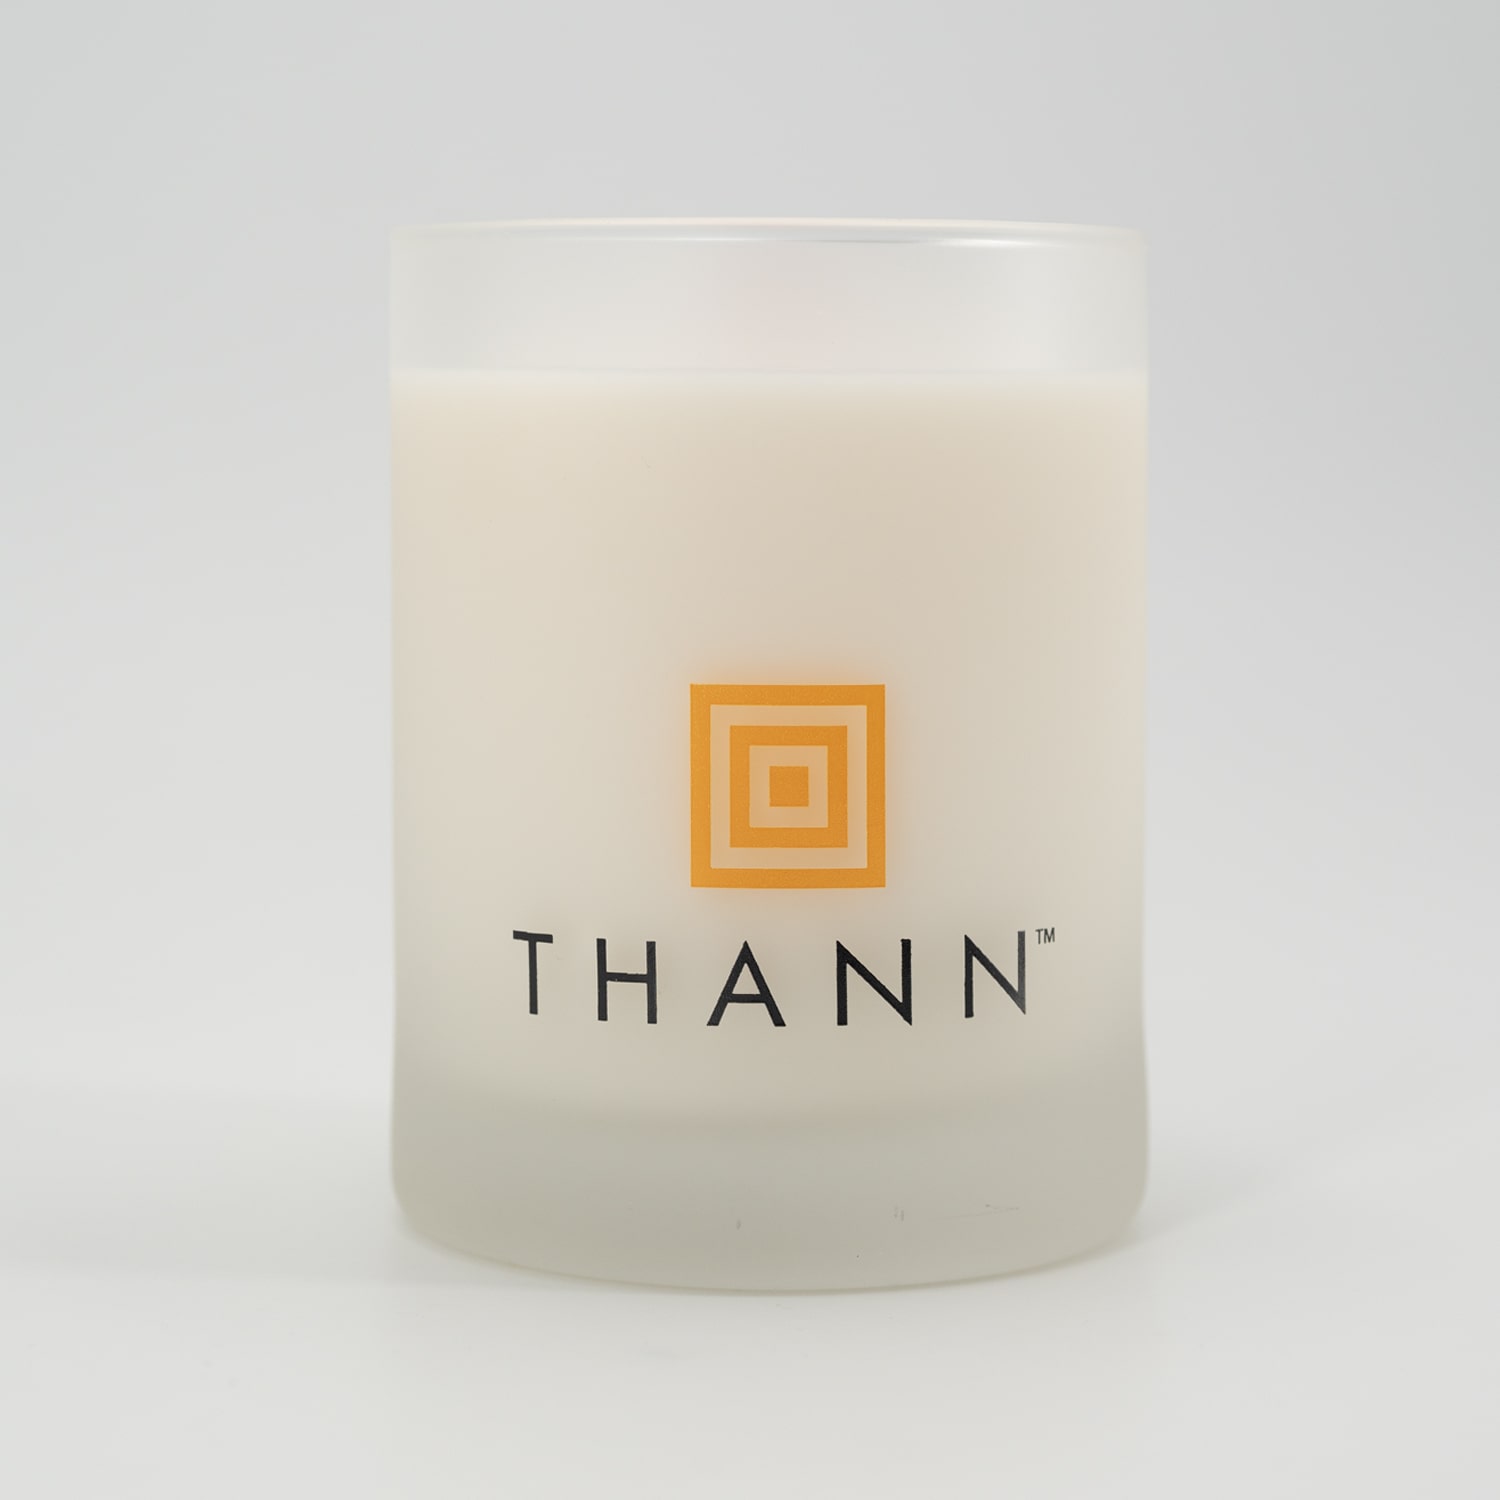 Thann Aromatherapy Candle - Earl Gray Infusion